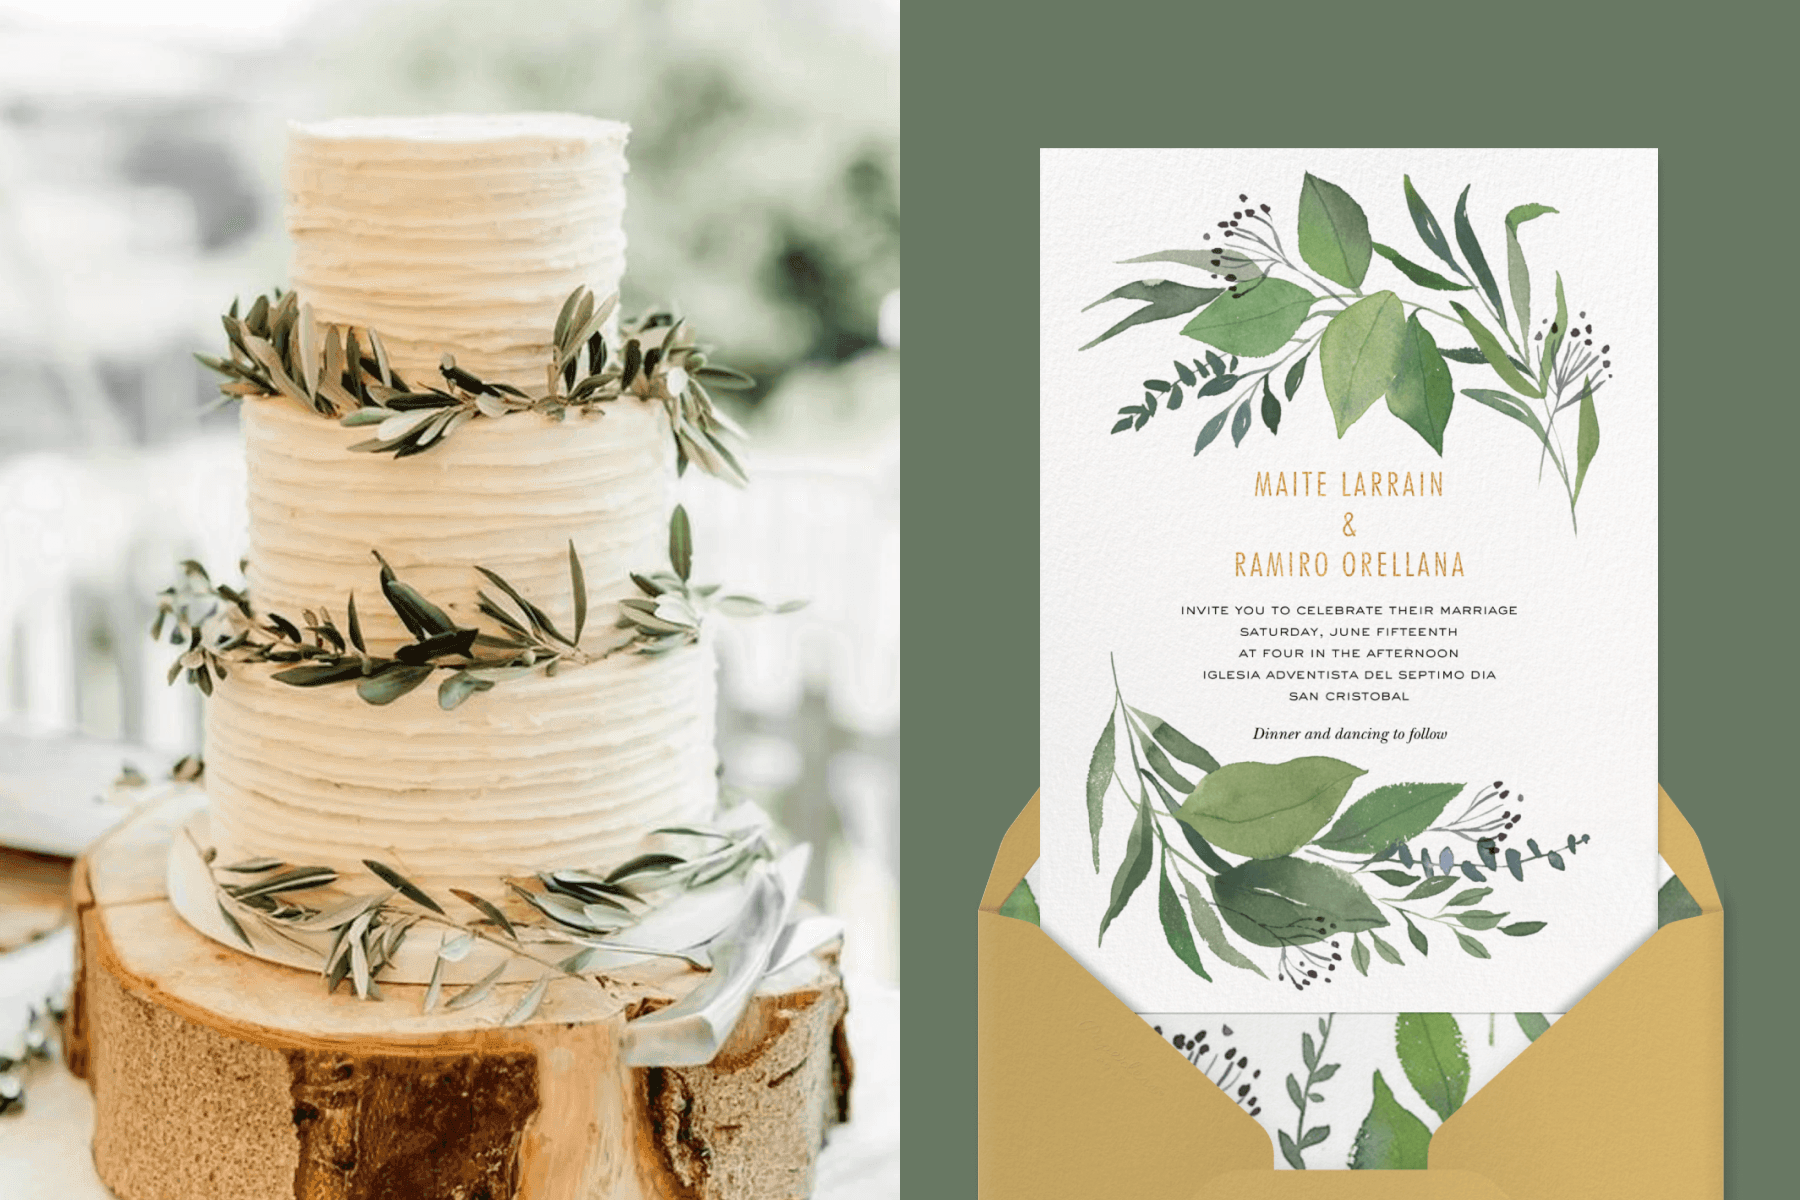 Left: A white three-tiered wedding cake decorated with olive branches. Right: A wedding invitation with green watercolor leaves.